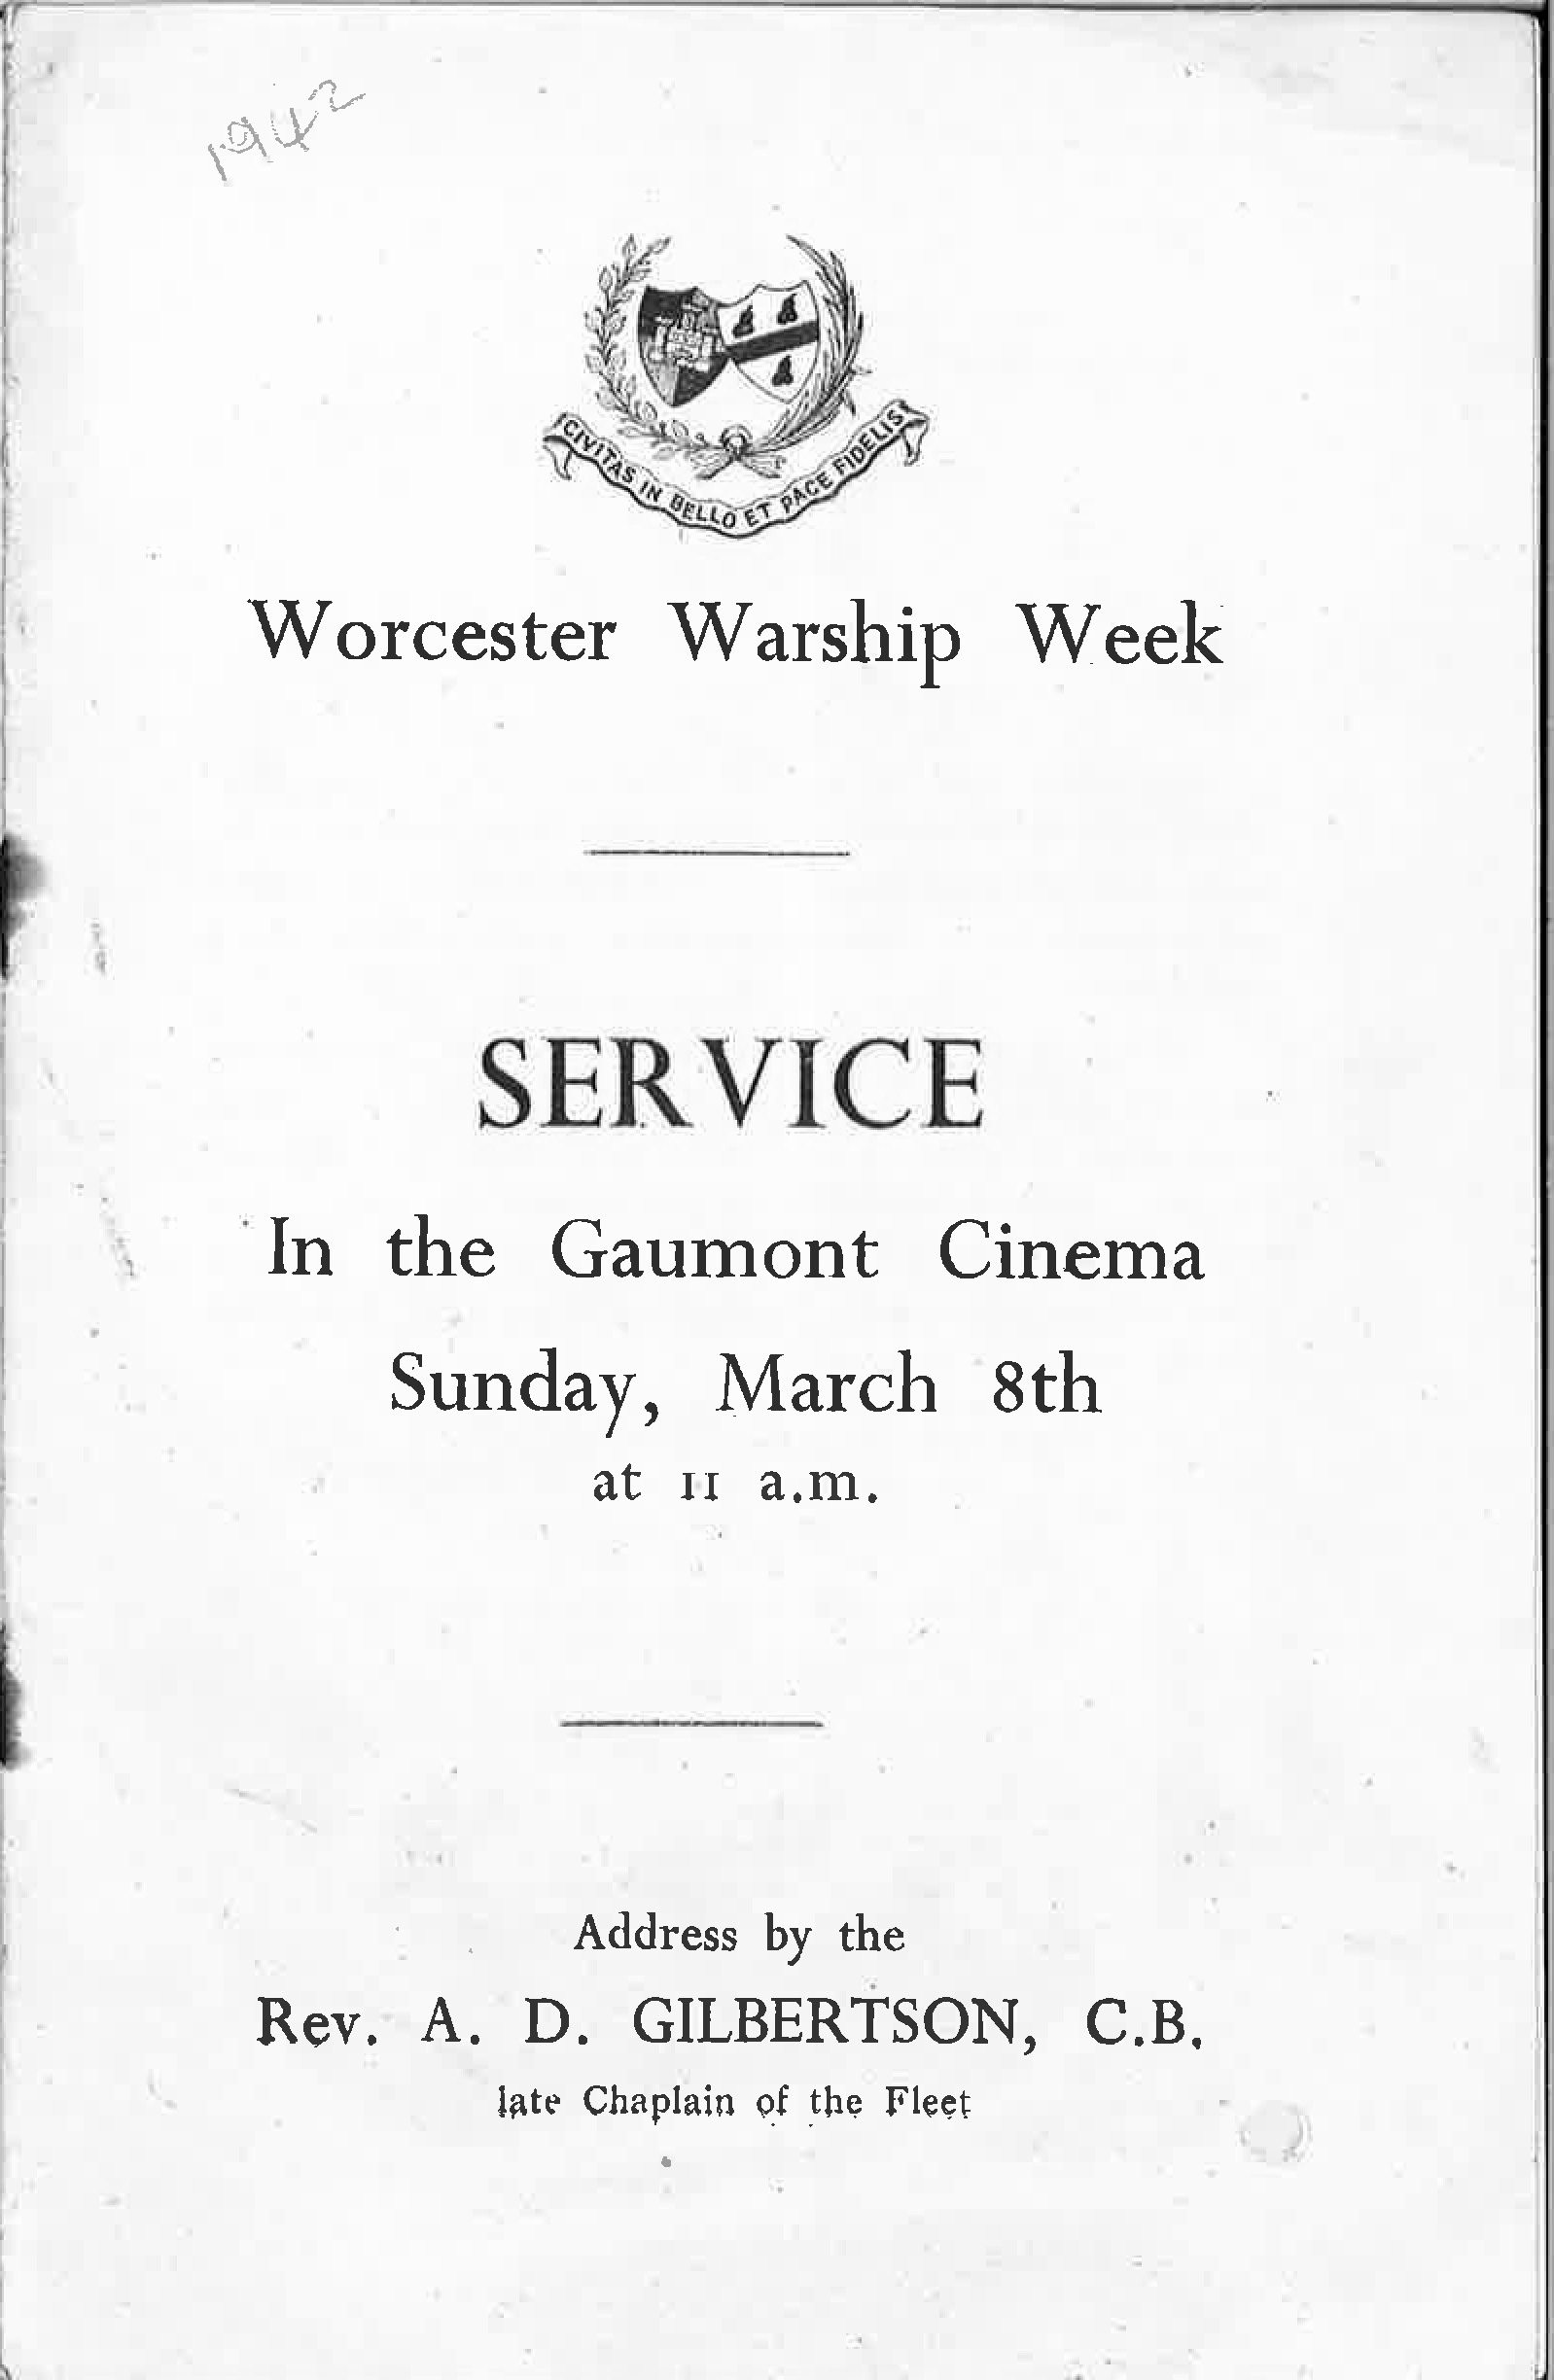 Order of Service for Warships Week